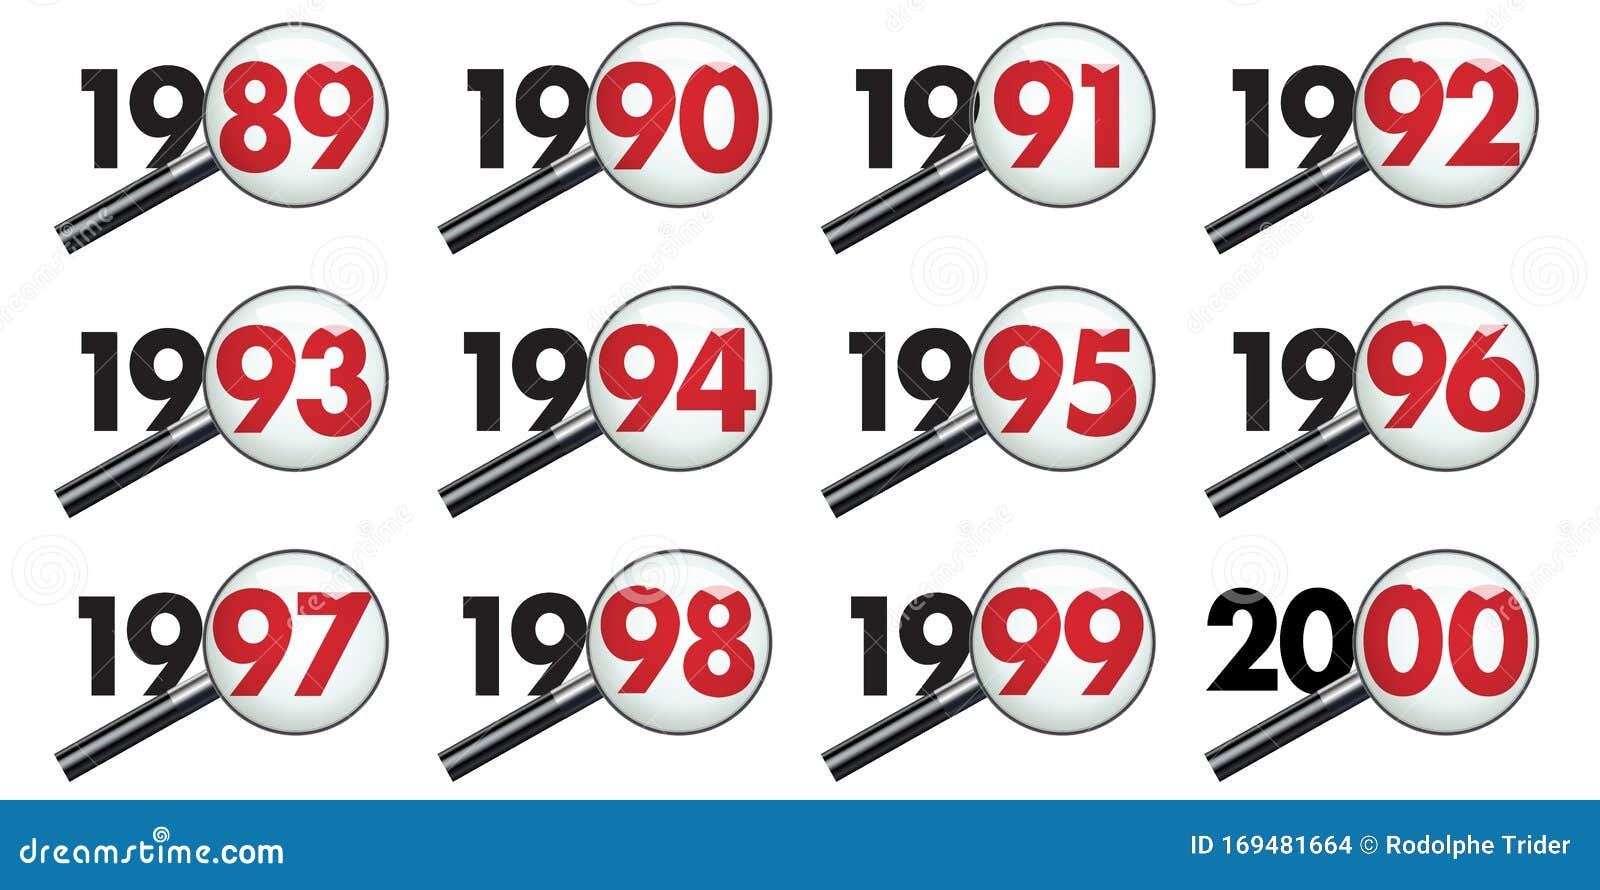 all the years of a decade under the microscope, from 1989 to the year 2000.